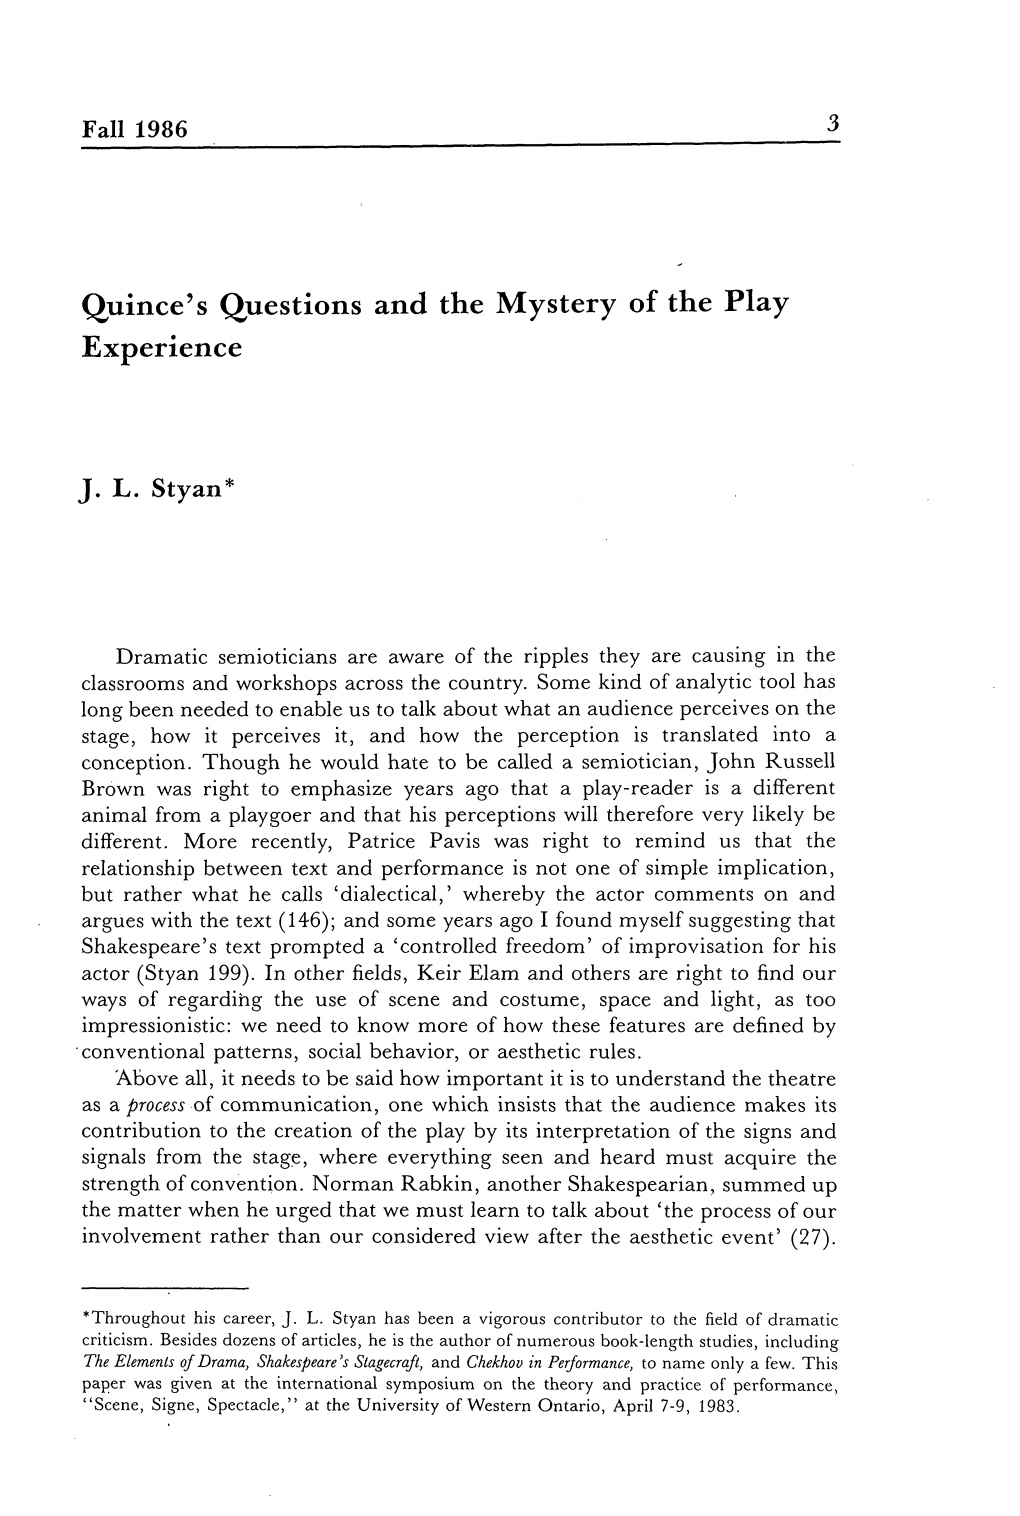 Quince's Questions and the Mystery of the Play Experience J. L. Styan*